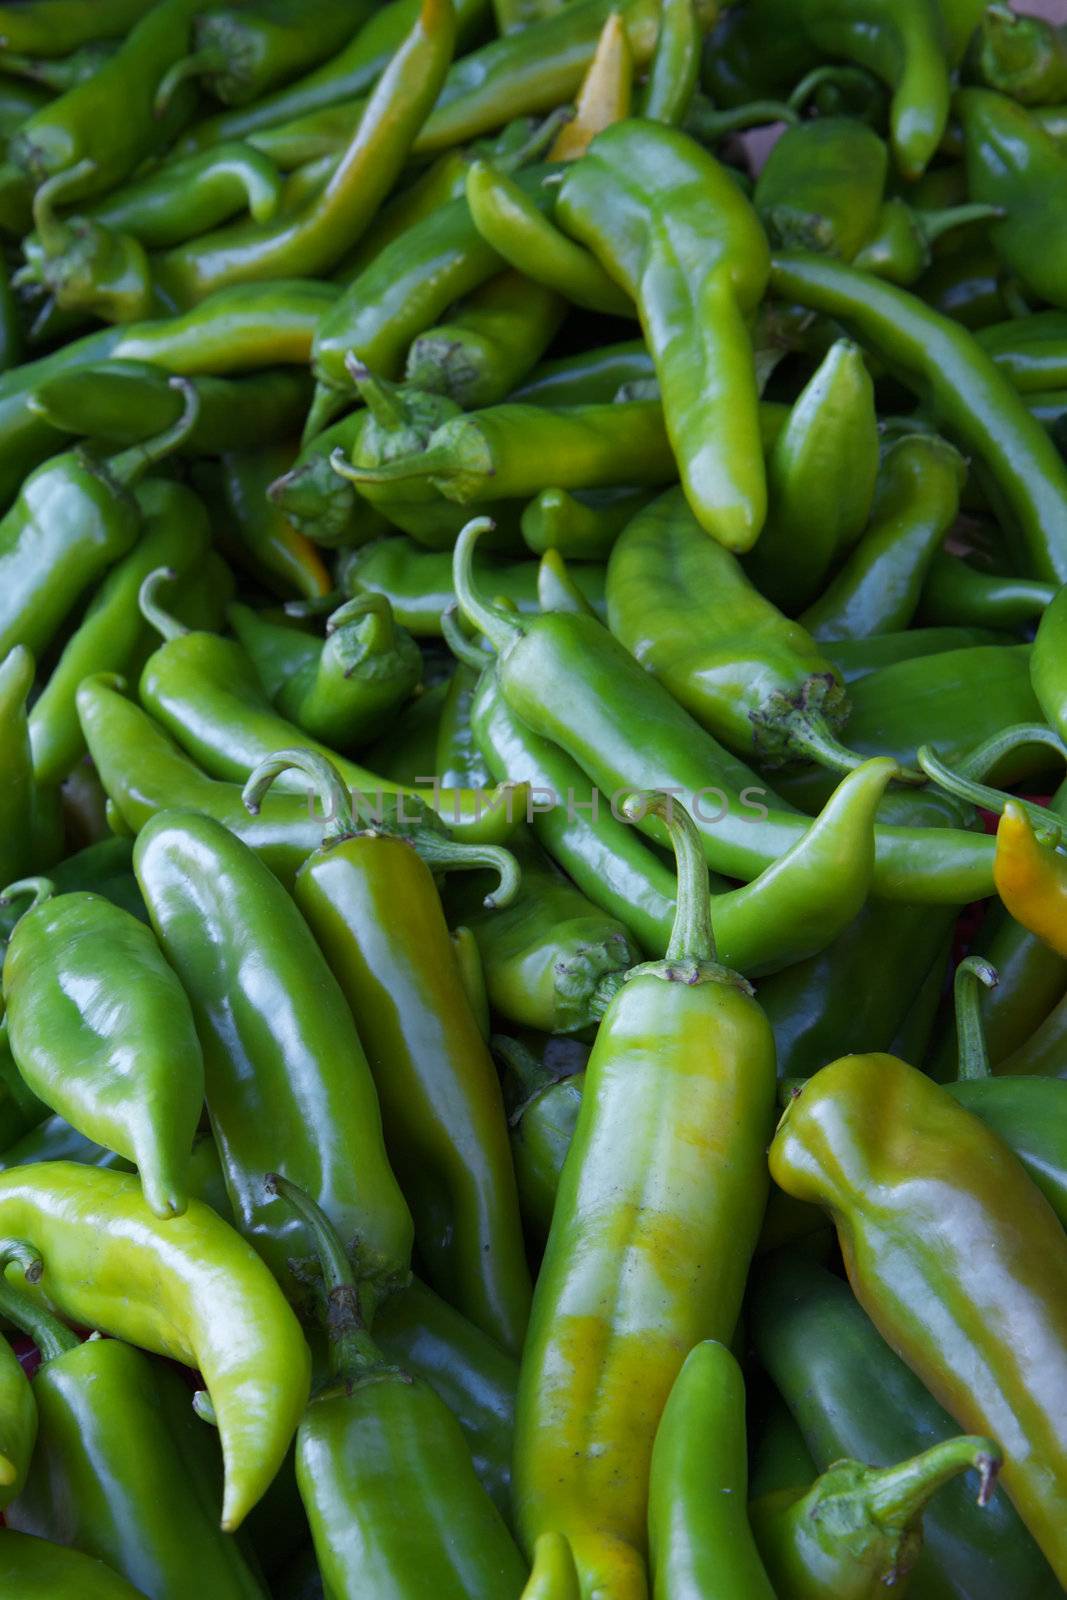 Pile of jalapeno green and yellow peppers at the farmers market